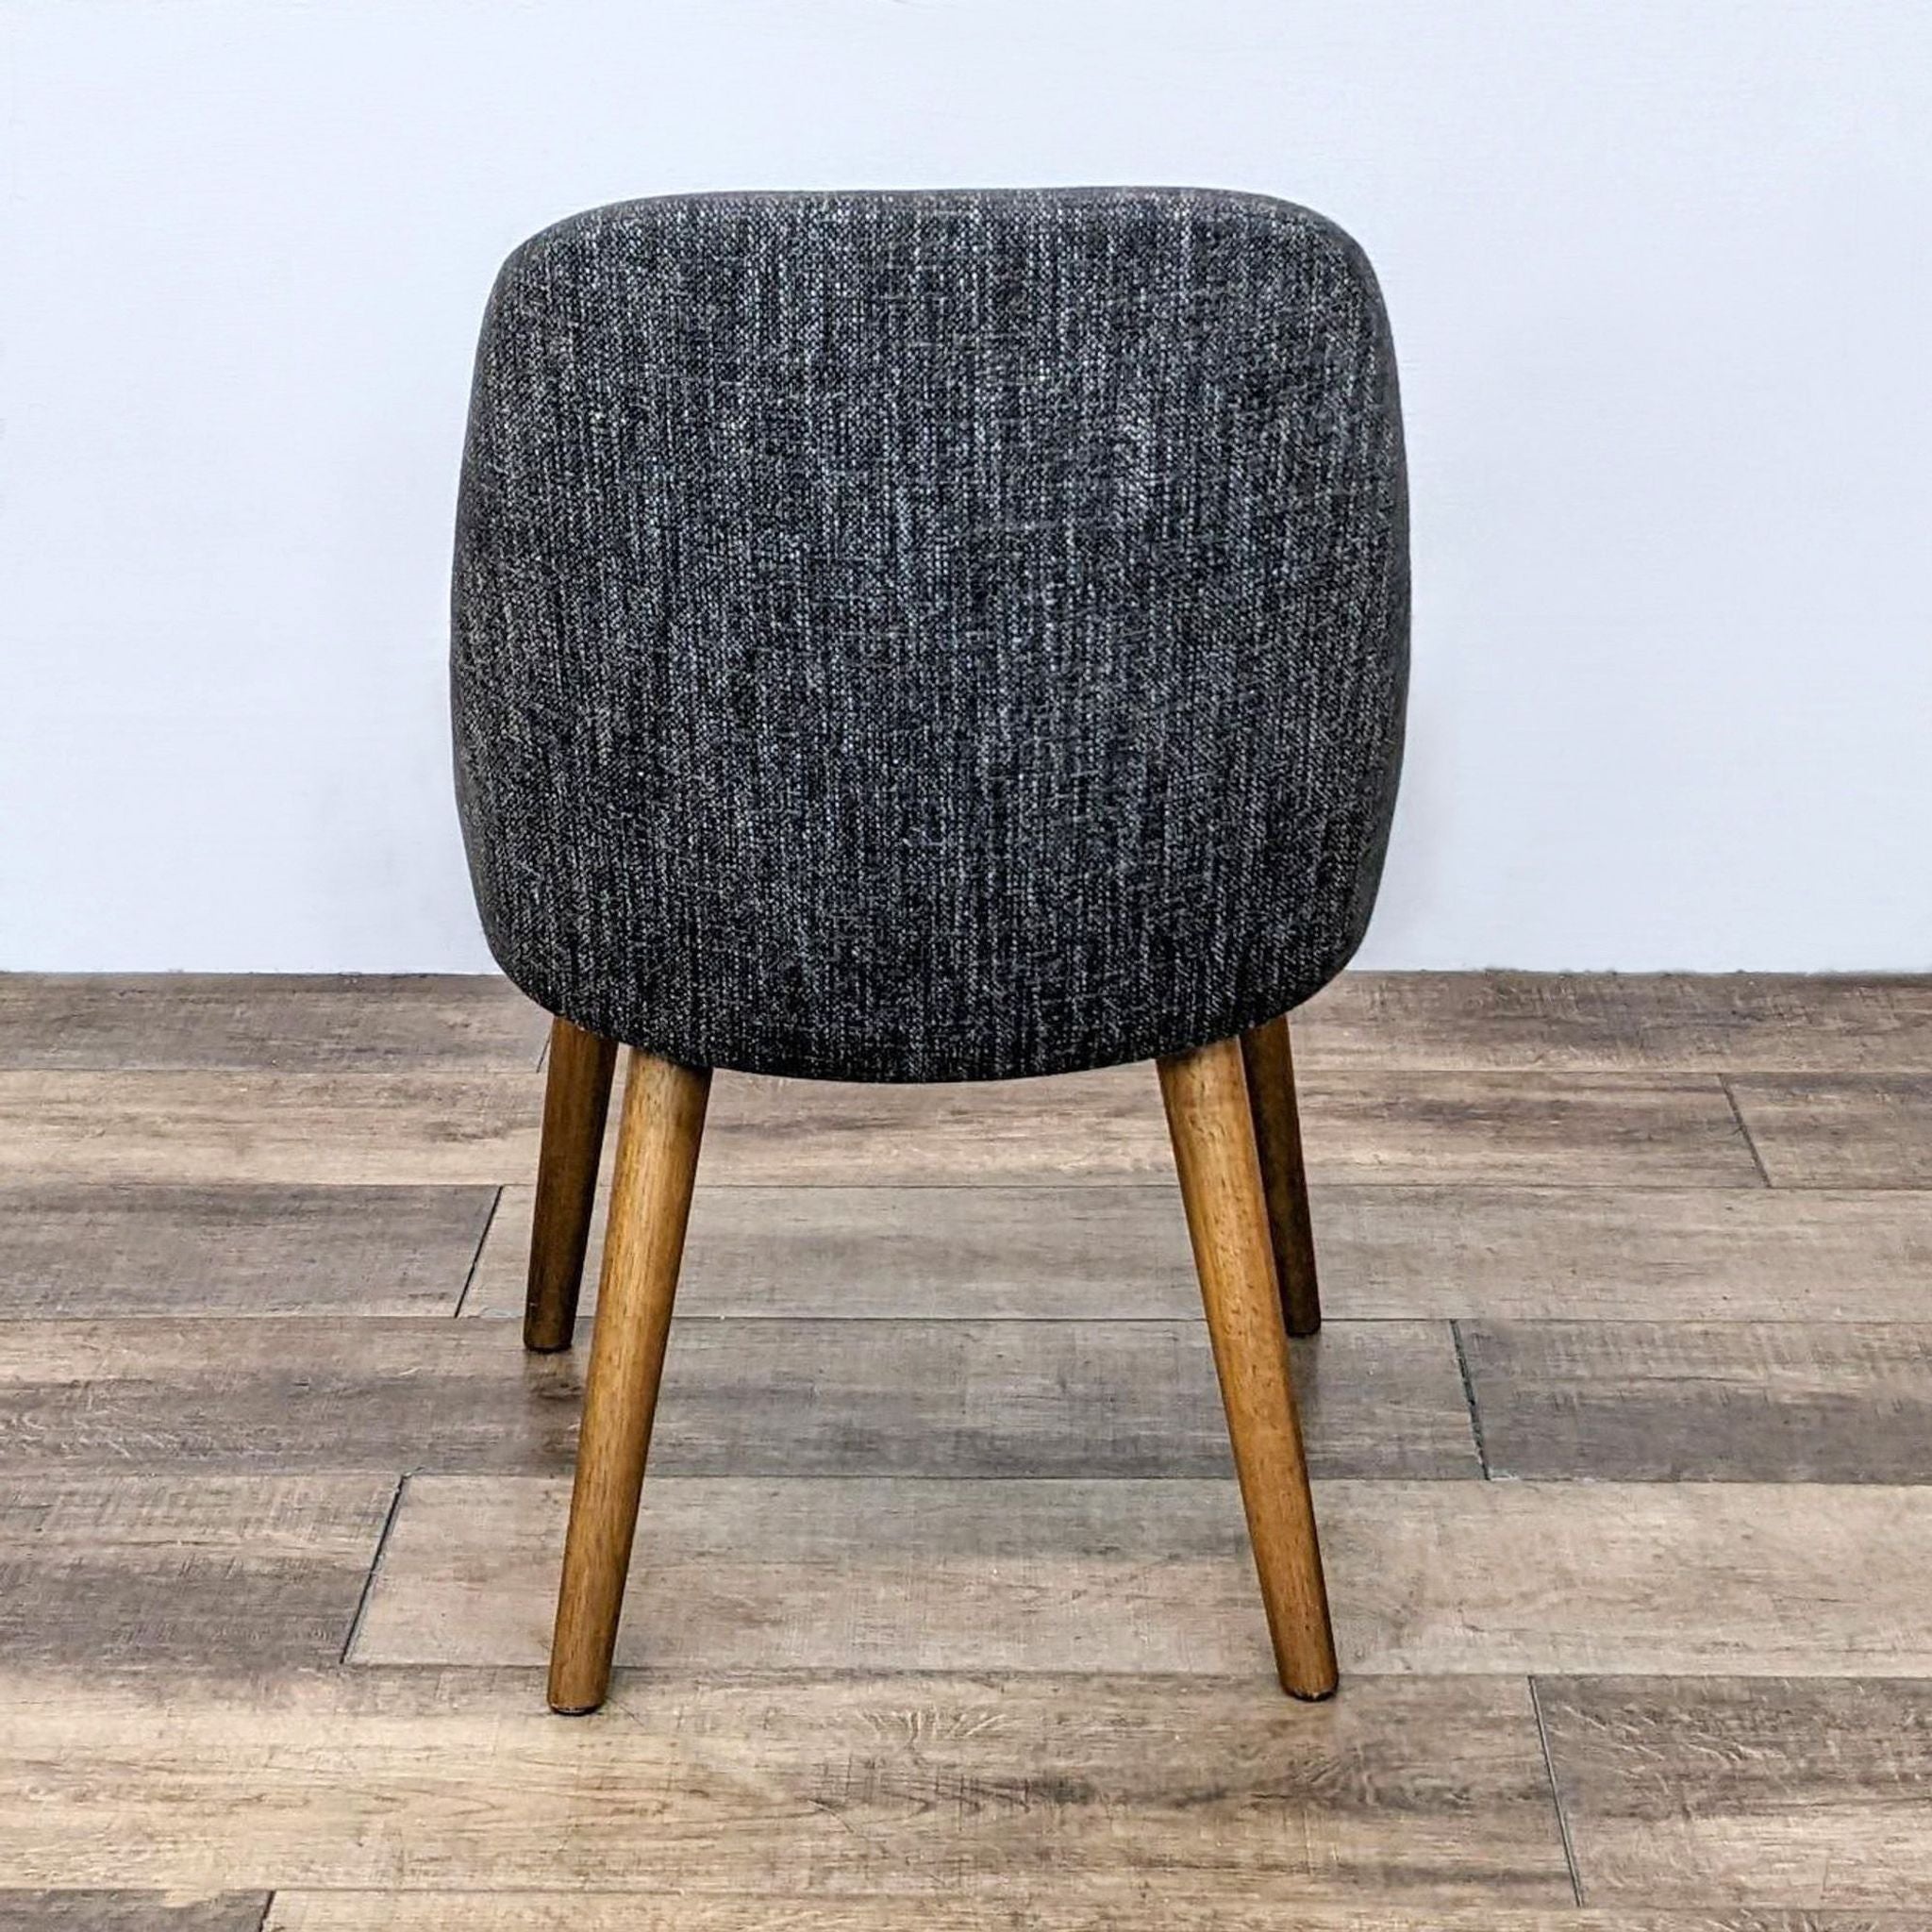 Rear view of a West Elm Mid-Century Dining Chair, emphasizing the chair's sloping back and tapered wooden legs on a wooden floor.